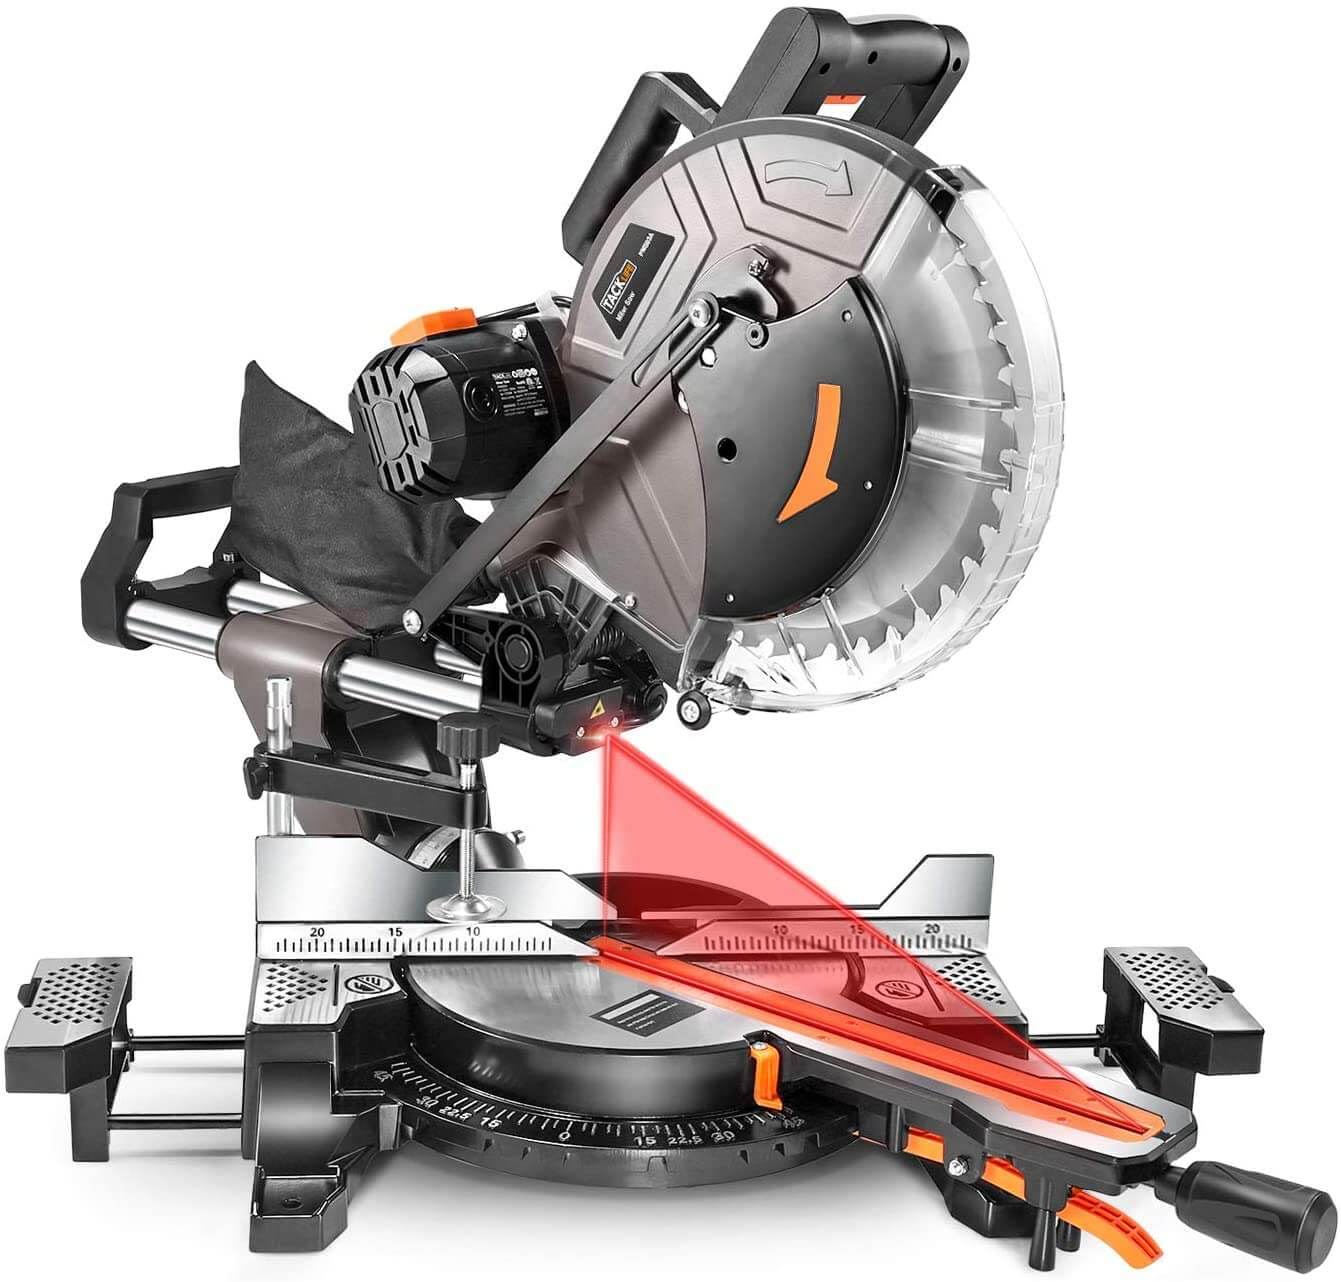 The 10 Best Compound Miter Saws Of 2022 [Review & Guide]